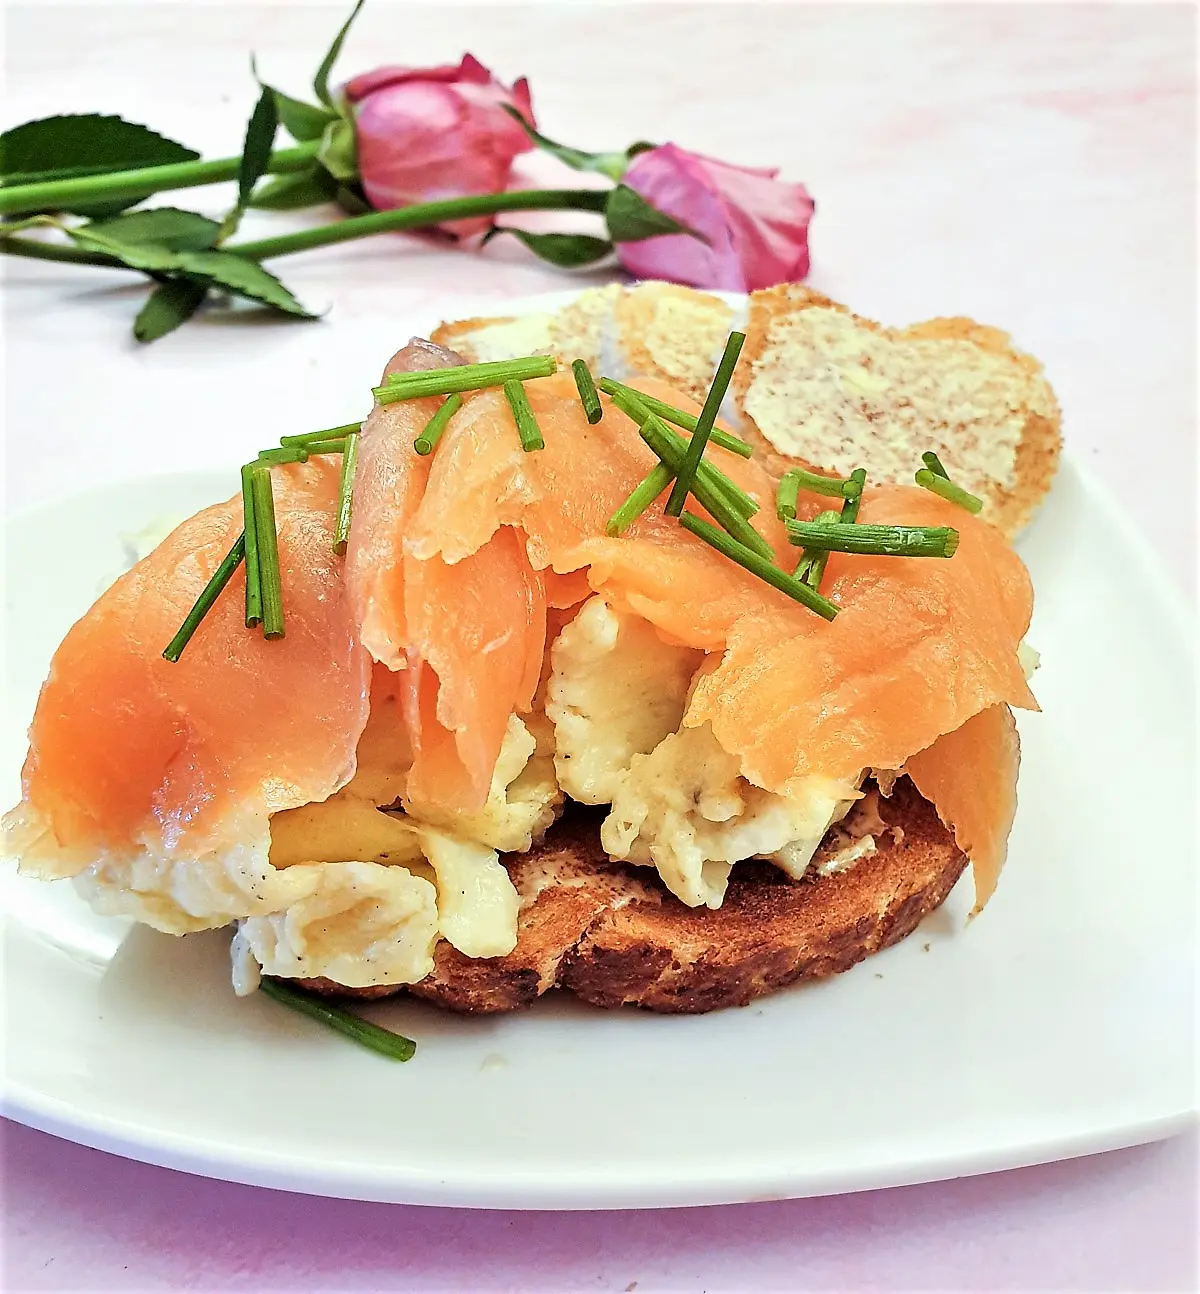 what sauce goes with smoked salmon and scrambled eggs - What kind of sauce do you put on scrambled eggs